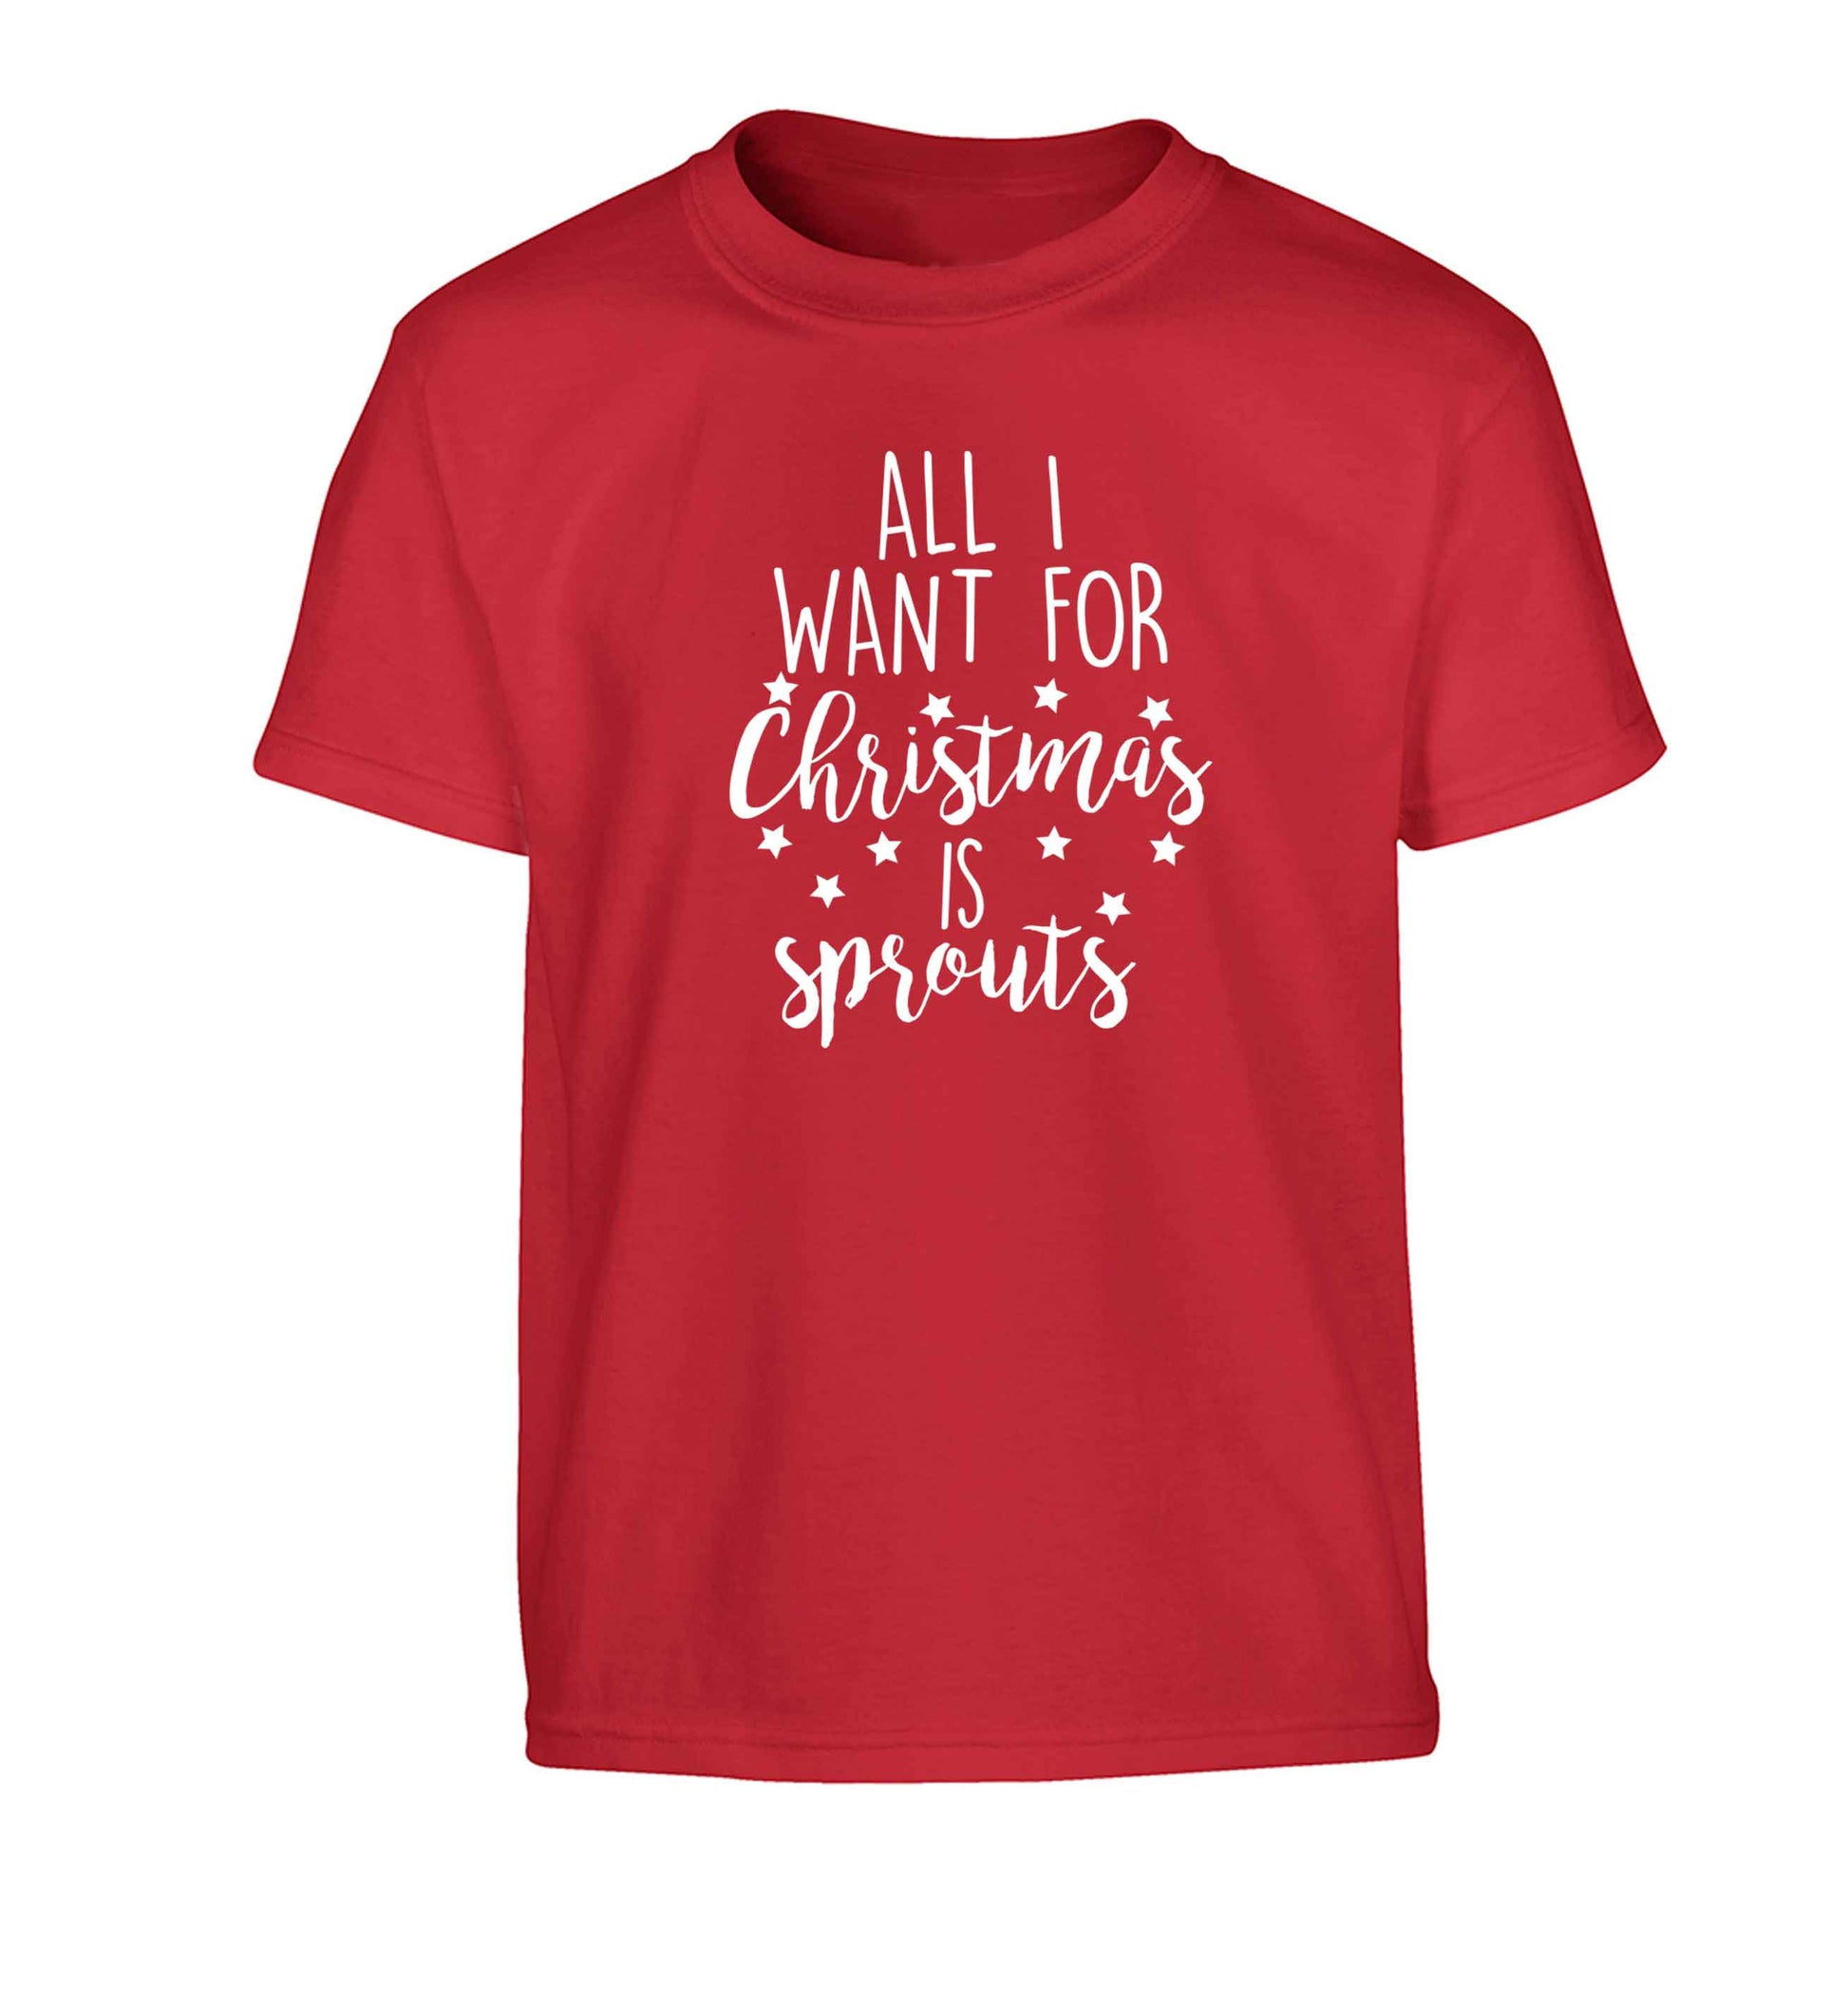 All I want for Christmas is sprouts Children's red Tshirt 12-13 Years